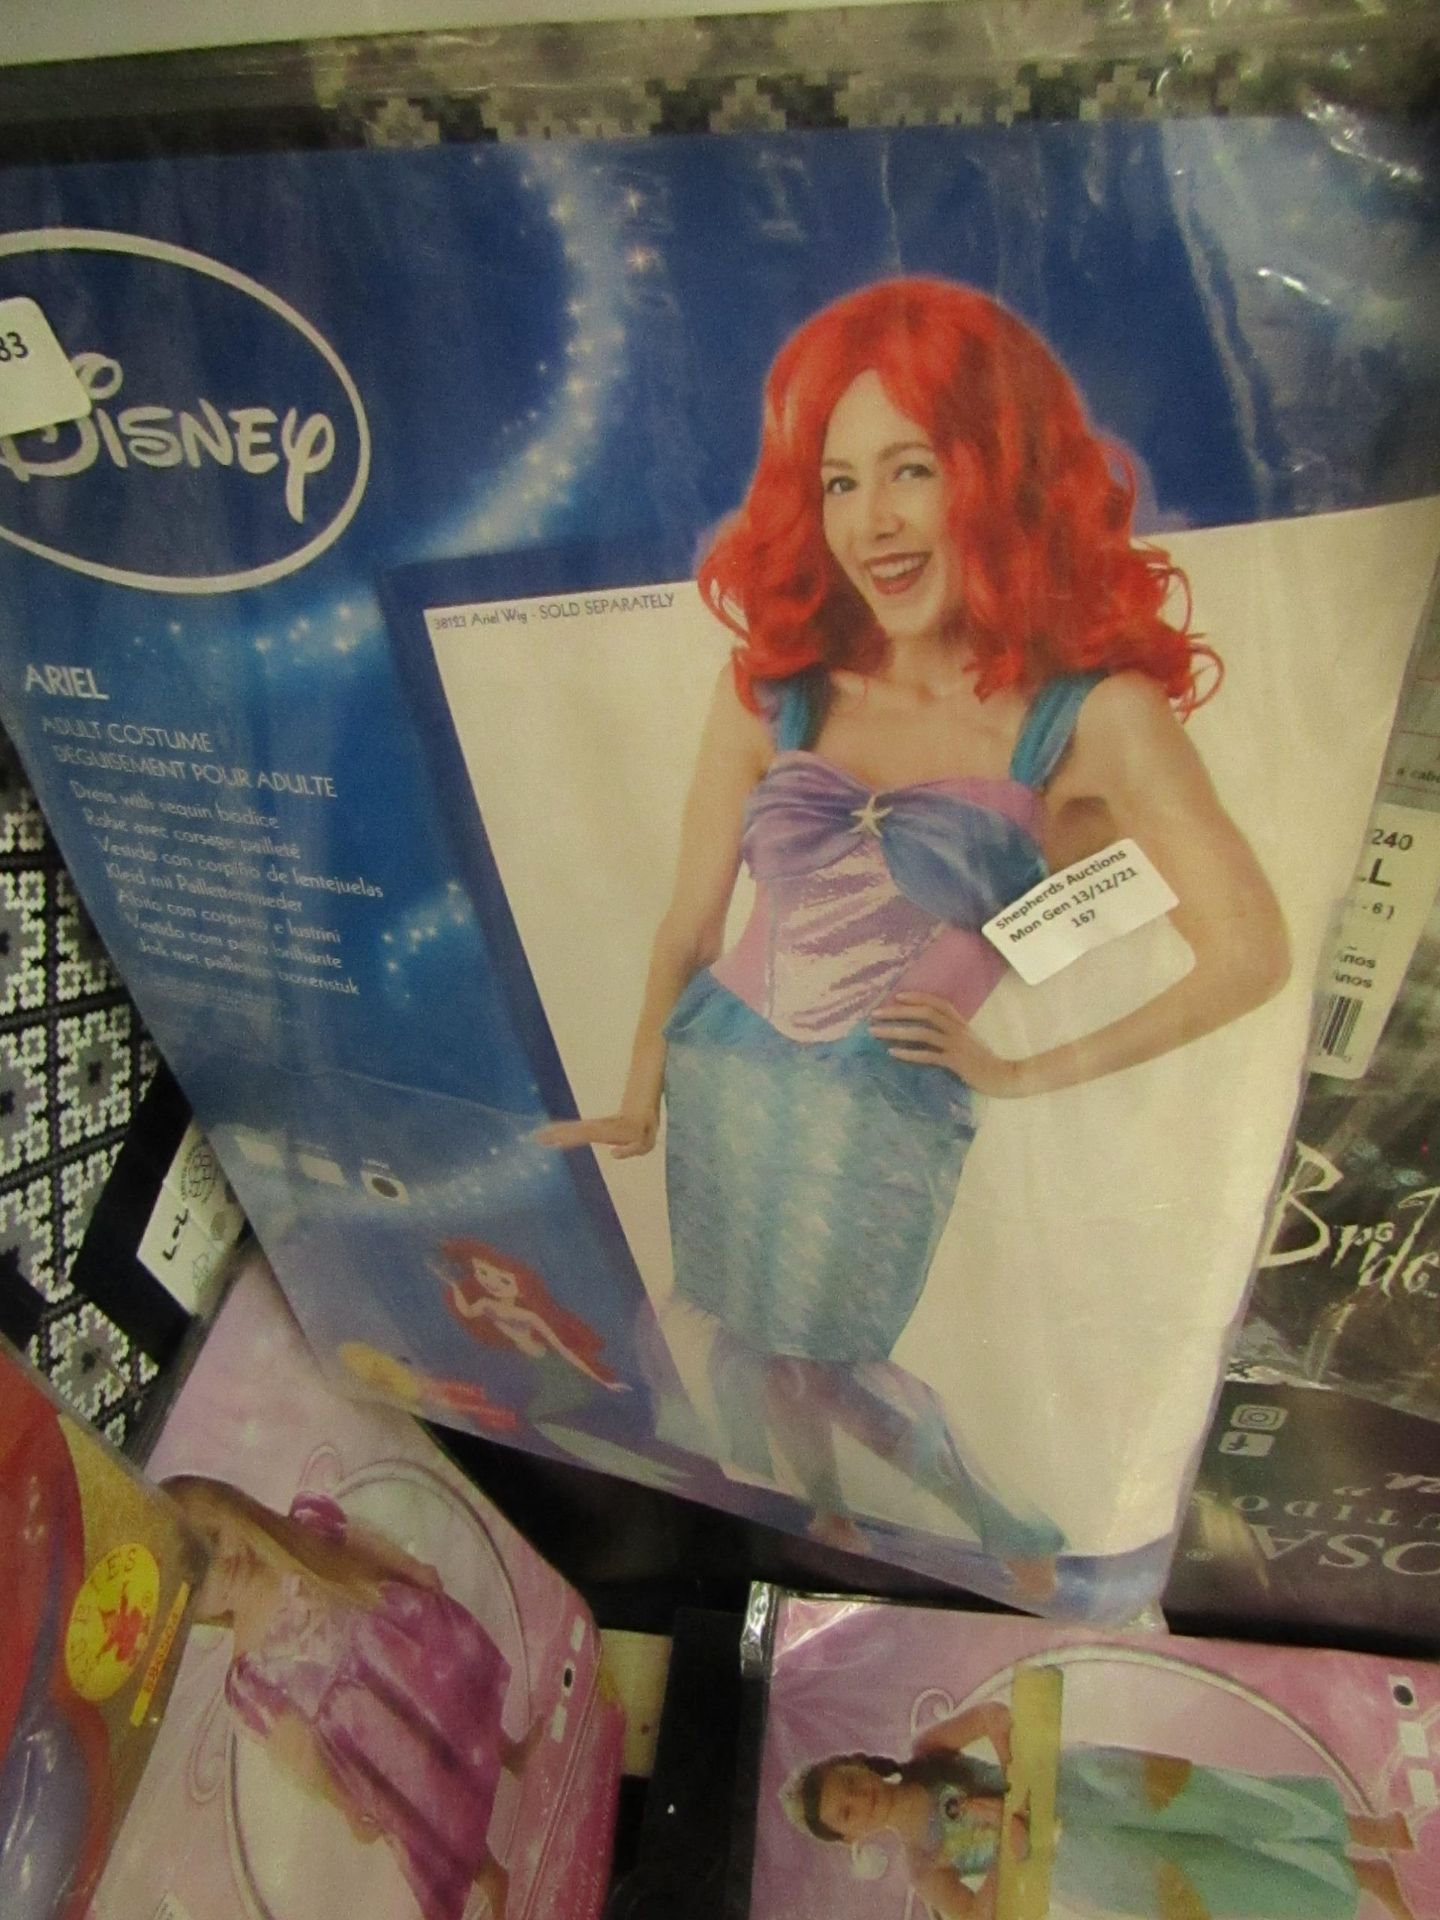 Disney - Ariel Adult Dressing-Up Costume - Size Large Womens Dress Size 16-18 - Unused & Packaged.